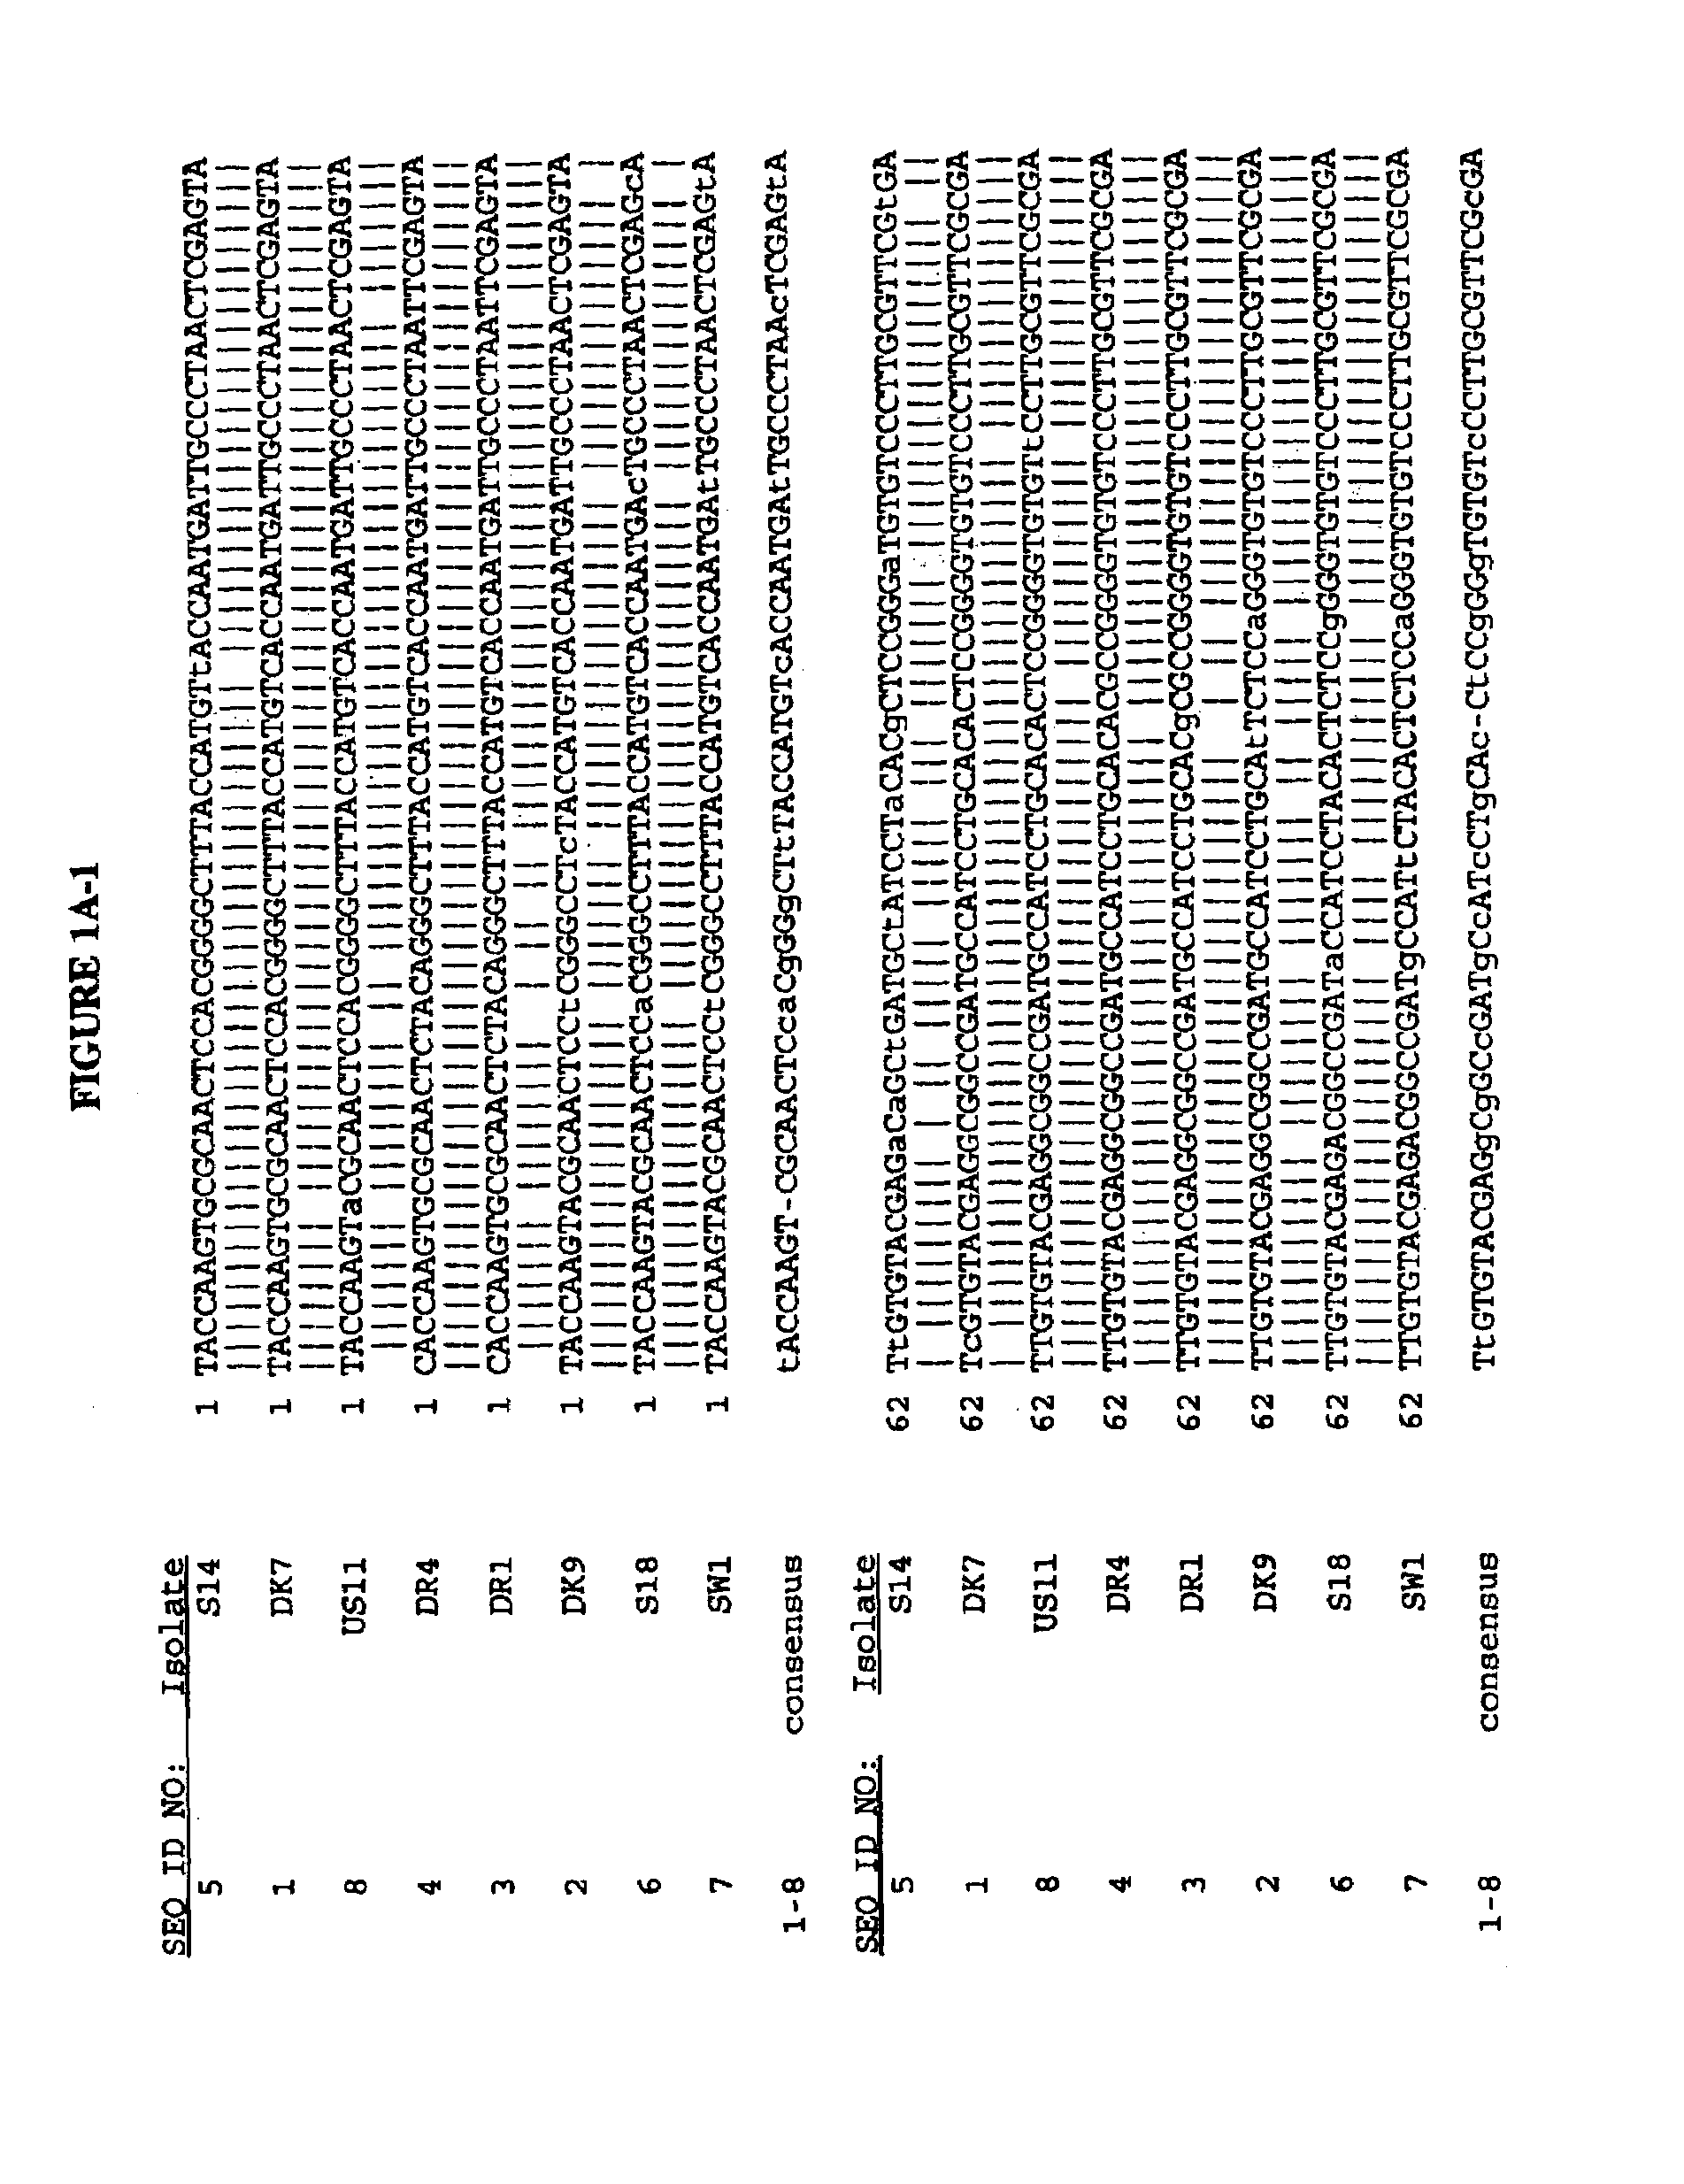 Nucleotide and deduced amino acid sequences of the envelope 1 and core genes of isolates of hepatitis C virus and the use of reagents derived from these sequences in diagnostic methods and vaccines